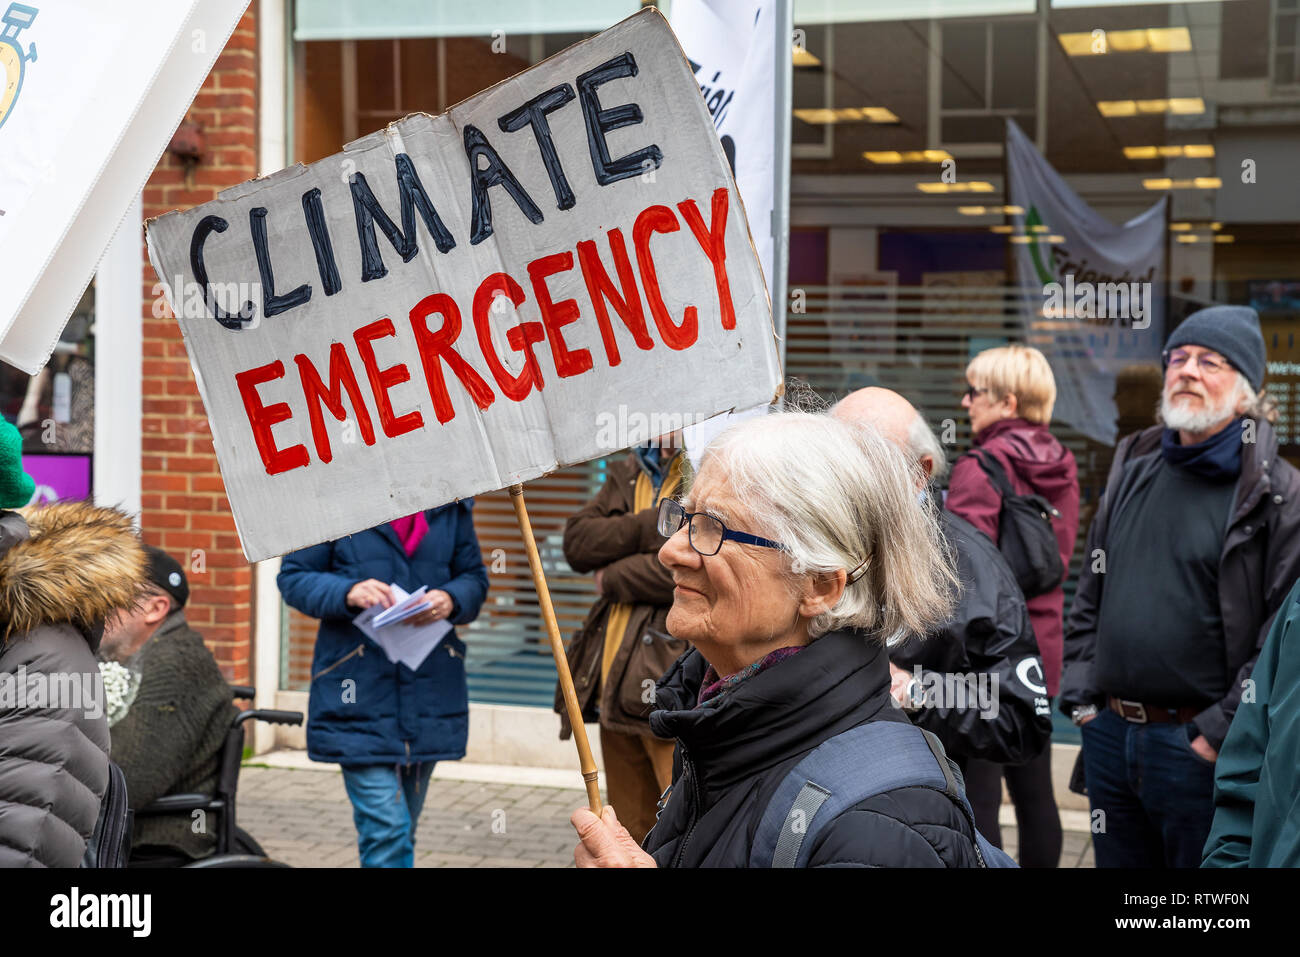 Canterbury, UK. 23rd February 2019. Supporters of the Canterbury Extinction Rebellion Group form up in the City Centre then take part in a symbolic funeral procession representing the death of plants, animals, humans and the planet due to the climate crisis, loss or life. The protest culminated in a swarming action blocking St. Peters Place. Police were present but didn't interfere, there were no arrests. Credit: Stephen Bell/Alamy Live News Stock Photo